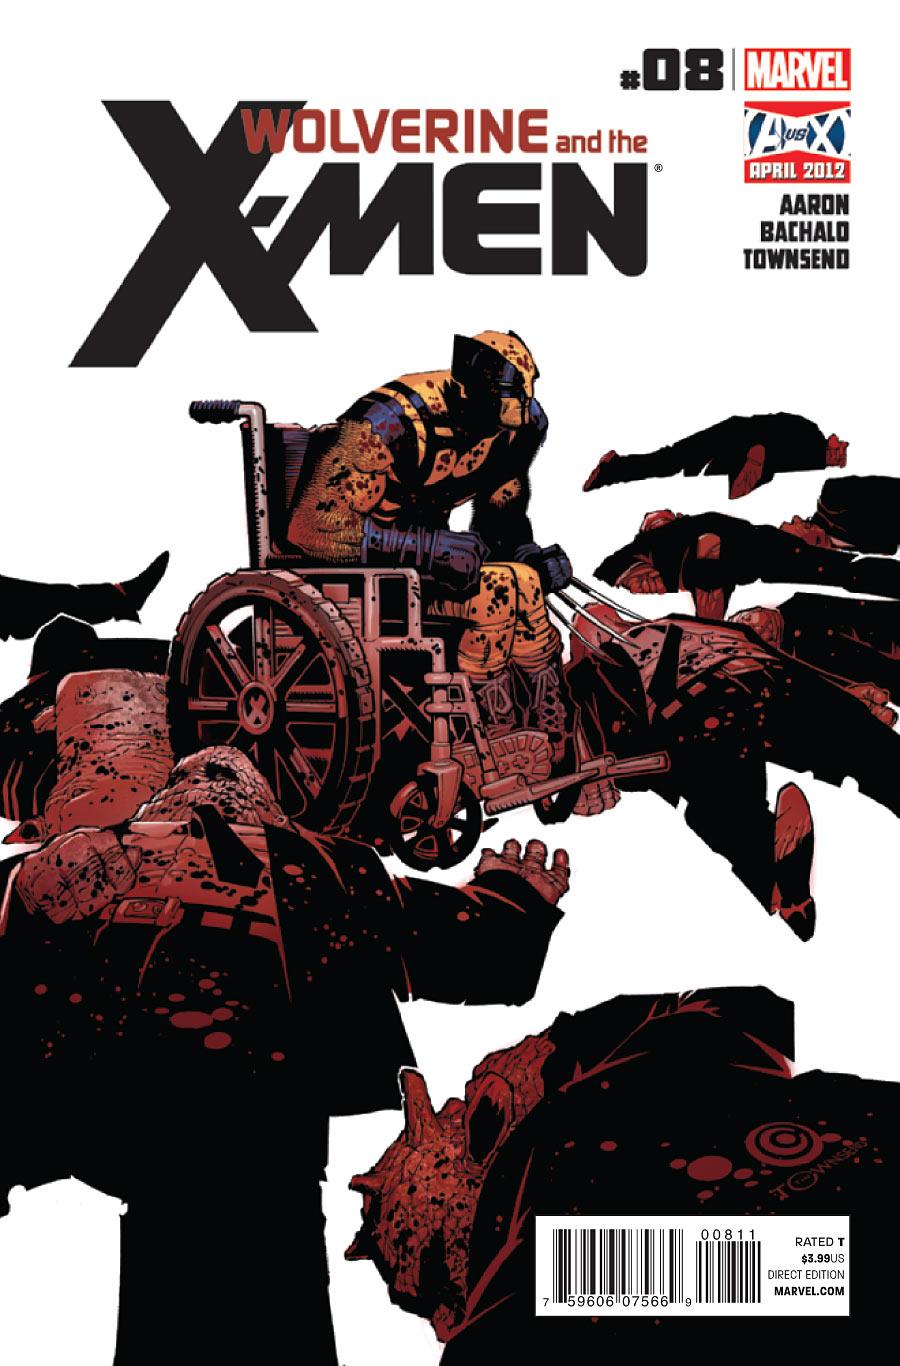 Wolverine and the X-Men Vol. 1 #8